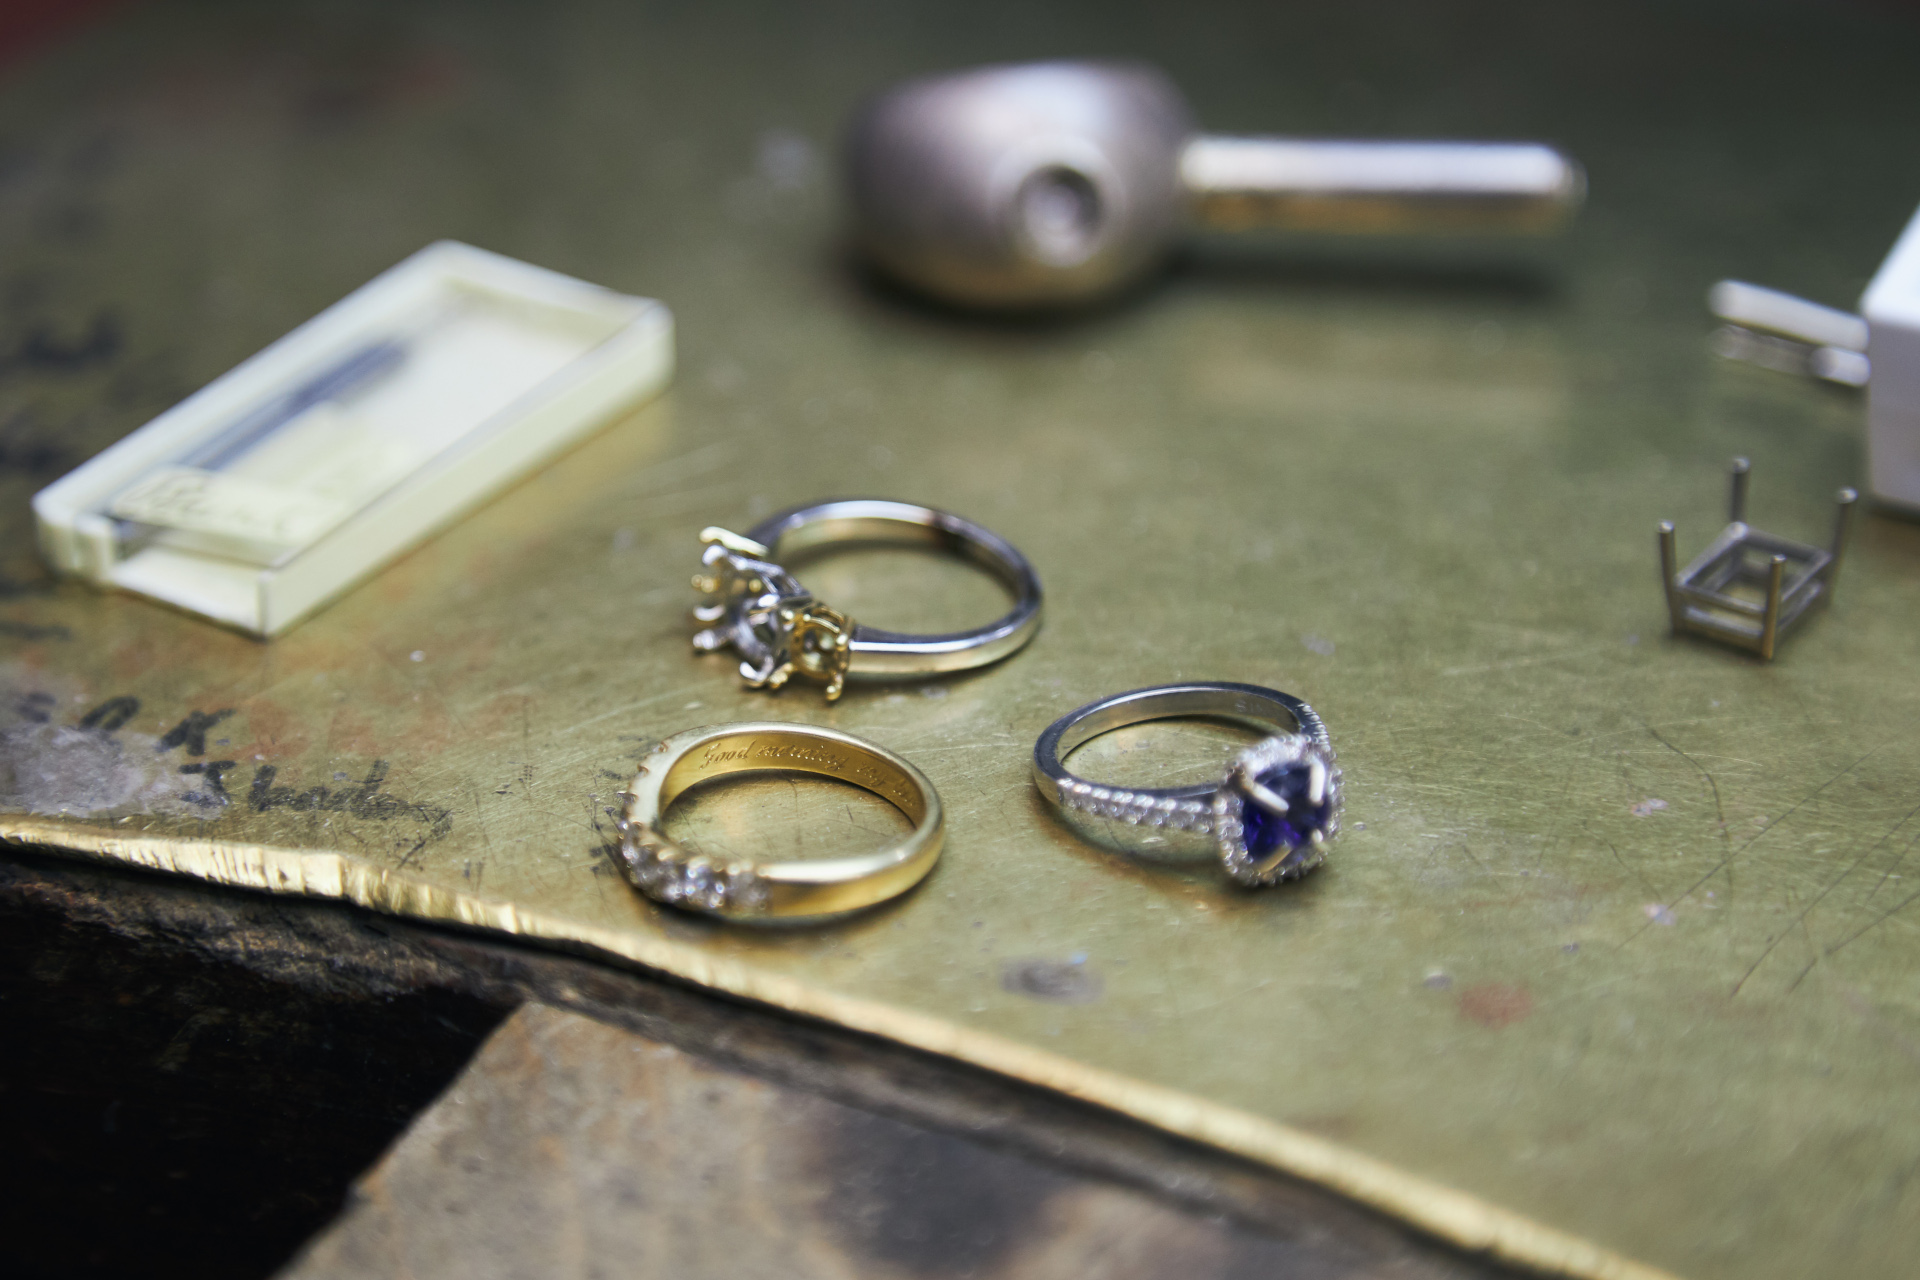 Rings on work bench